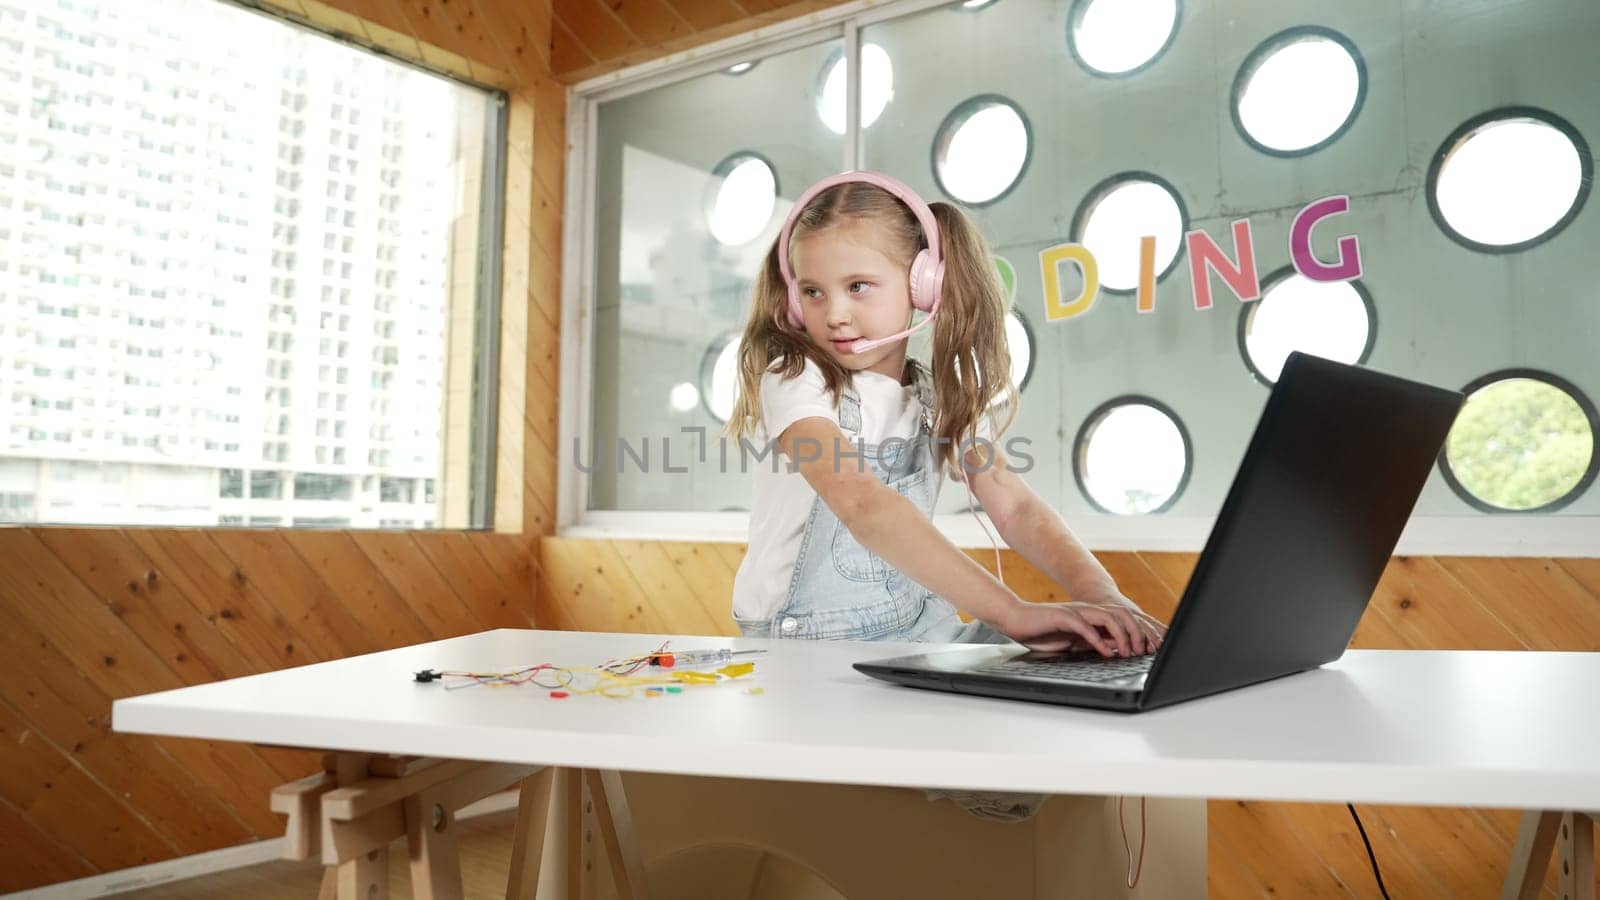 Smart caucasian girl wearing headphone and looking at electronic equipment. Skilled student working by using laptop to searching and learning electric equipment on table. Smart classroom. Erudition.